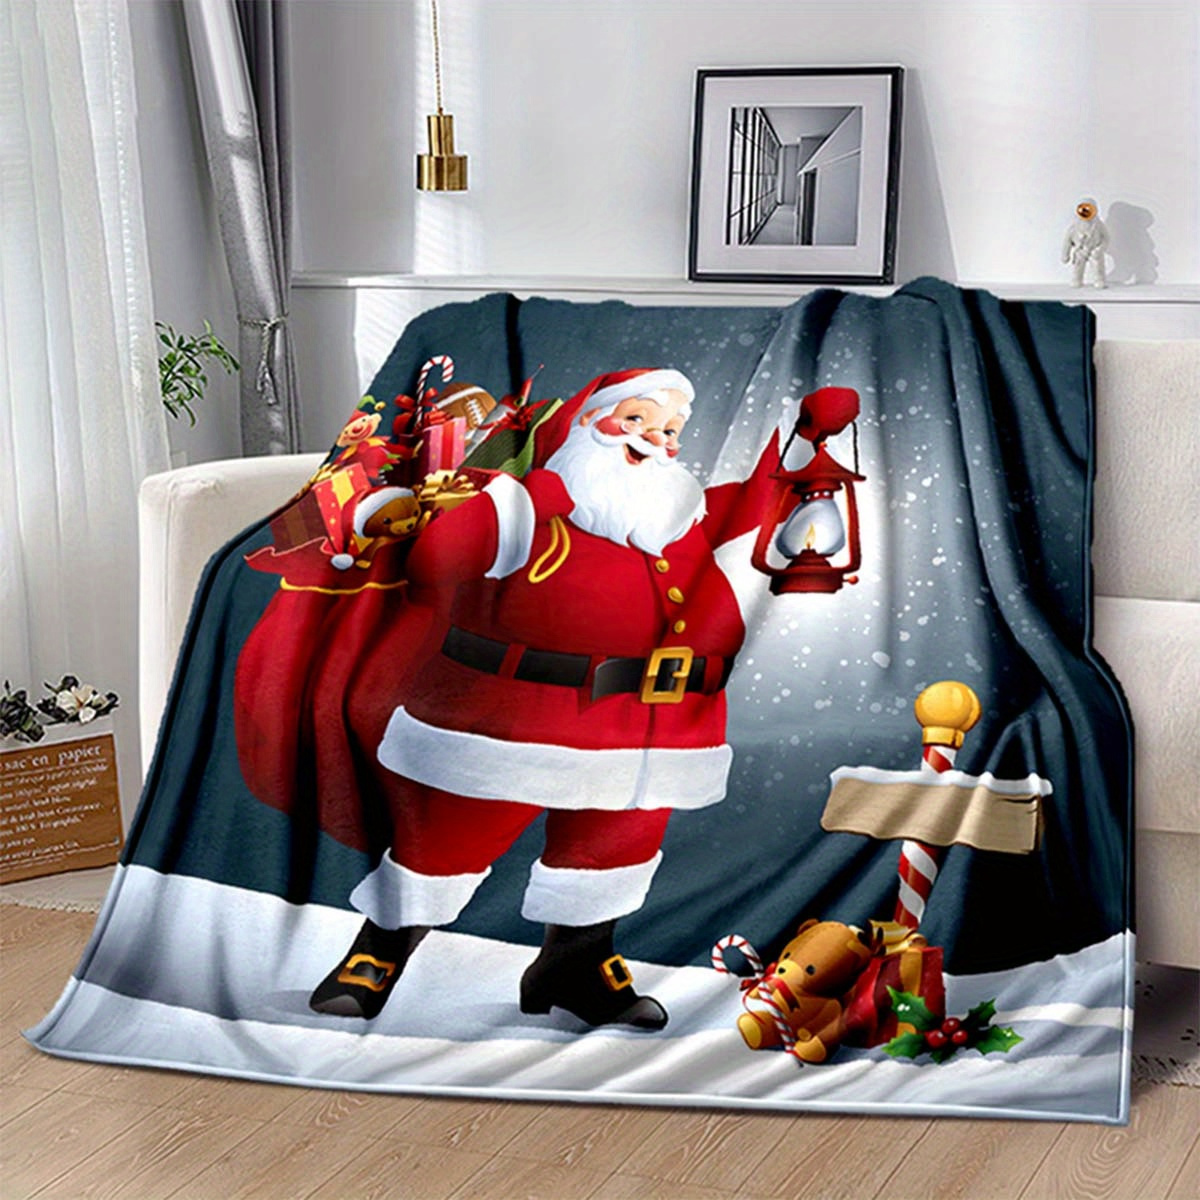 

3d Merry Christmas Santa Soft Flannel Throw Blanket For Living Room Bedroom Bed Sofa Picnic Cover Decor Napping Couch Chair Cover